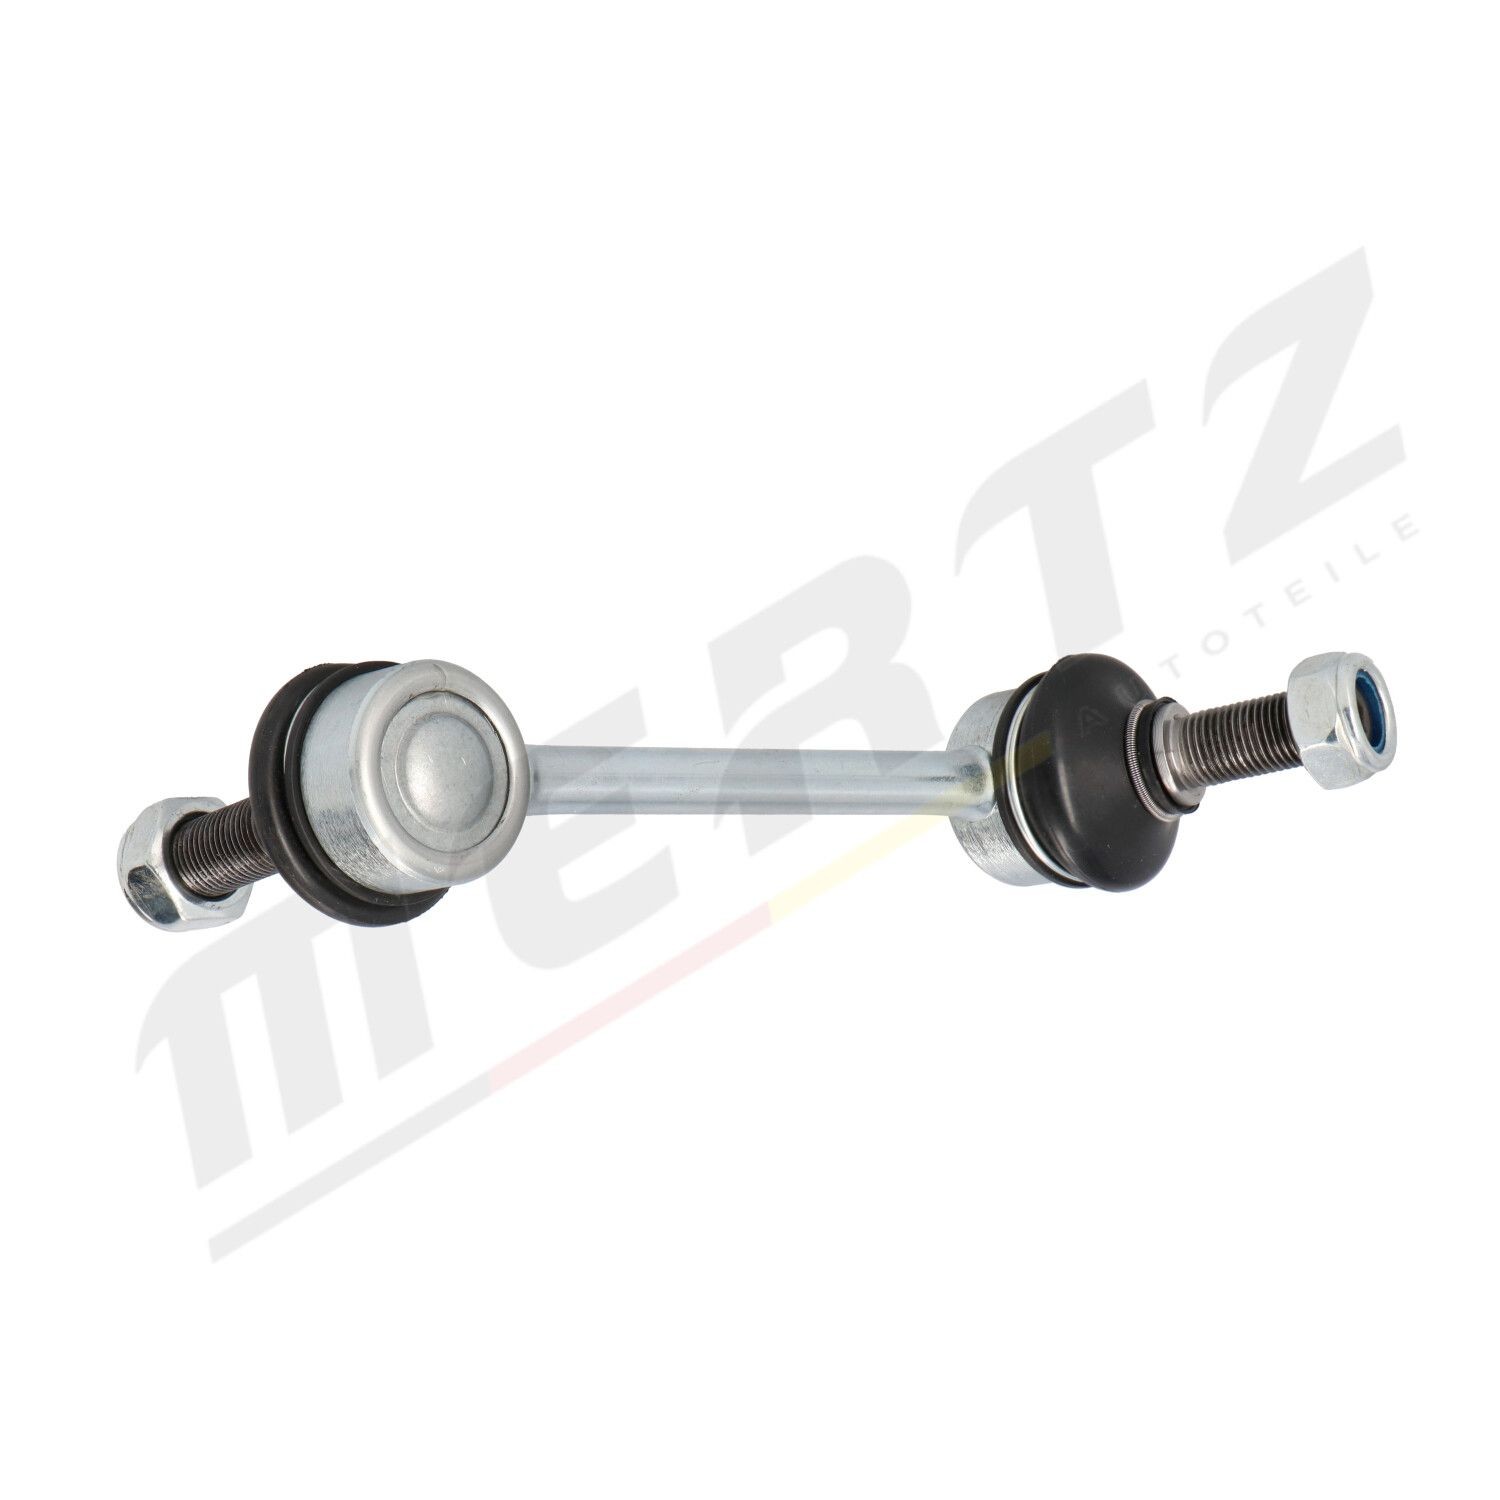 M-S1764 Anti-roll bar linkage M-S1764 MERTZ Front Axle Left, Front Axle Right, 129mm, M12x1,25 , with nut, Steel